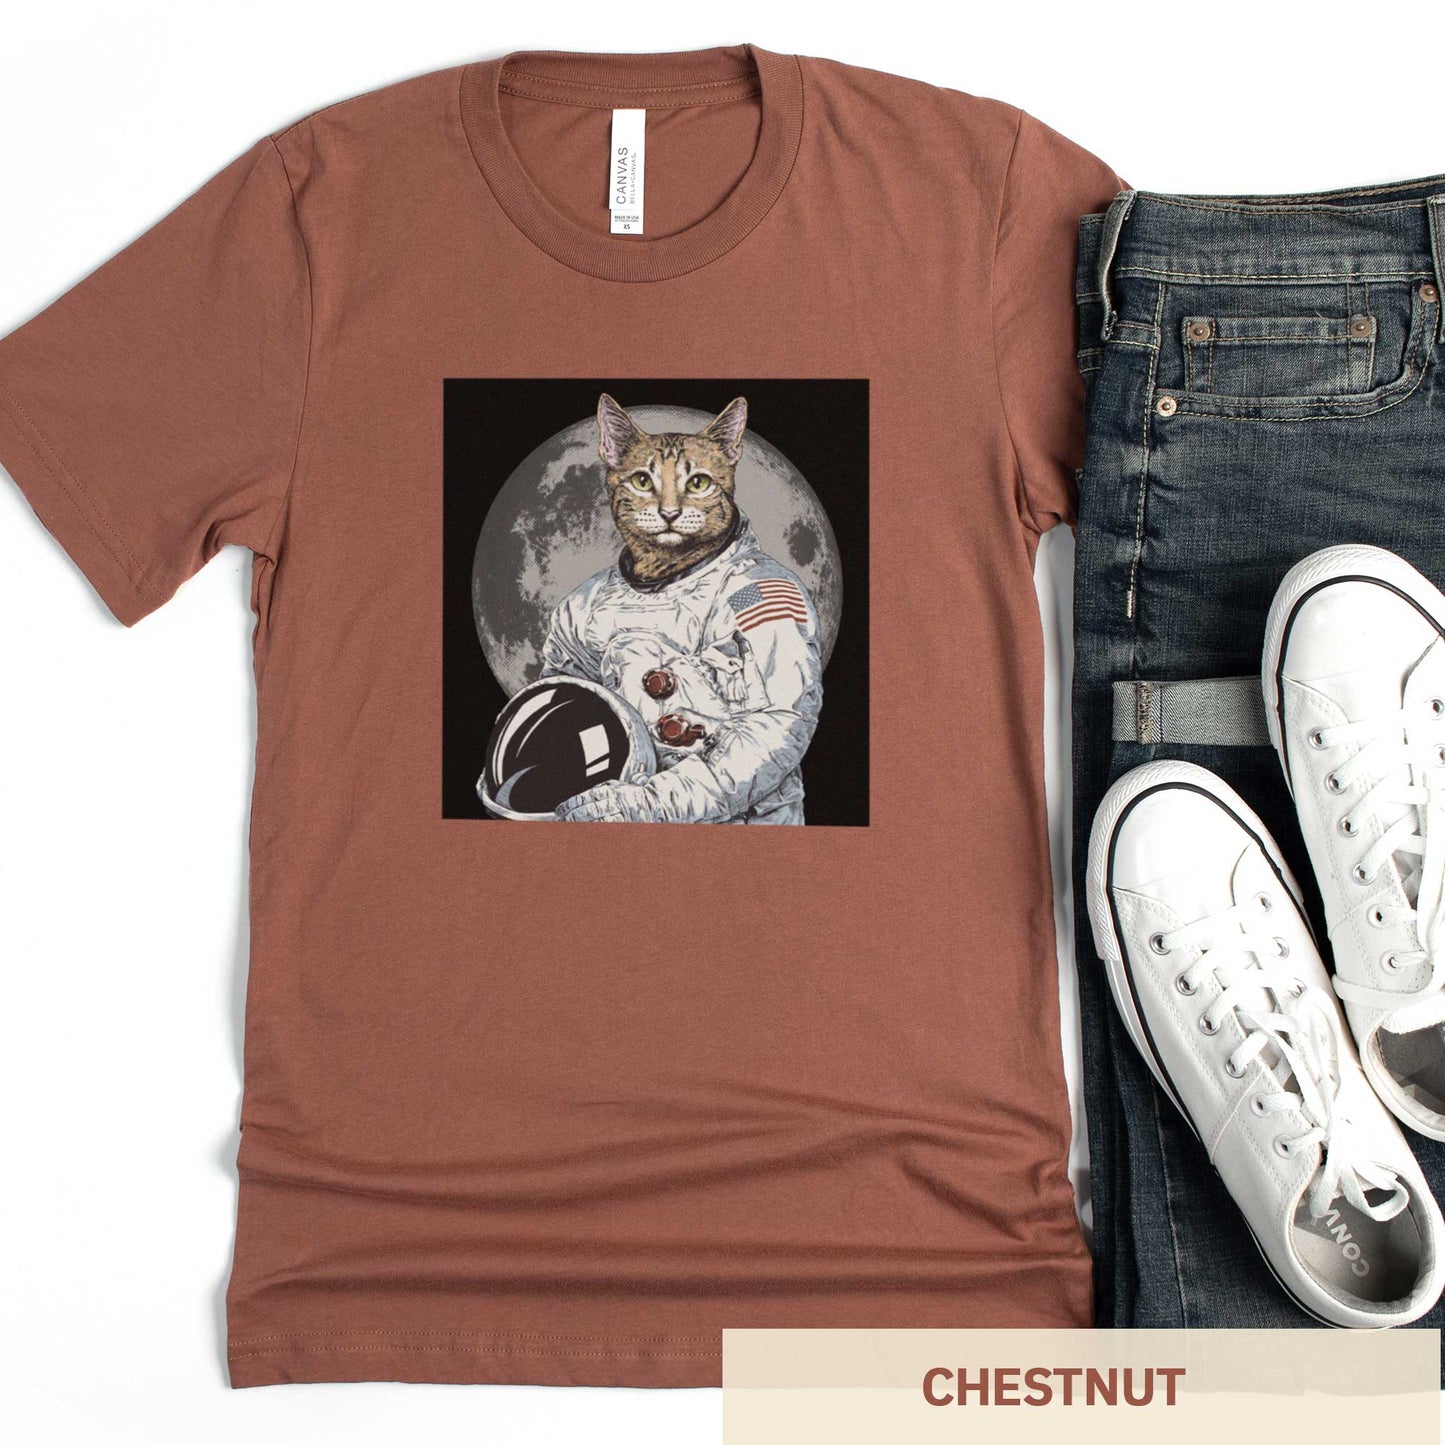 A chestnut cocoa brown Bella Canvas t-shirt featuring an illustrated portrait of a cat as a NASA astronaut with the moon in the background.